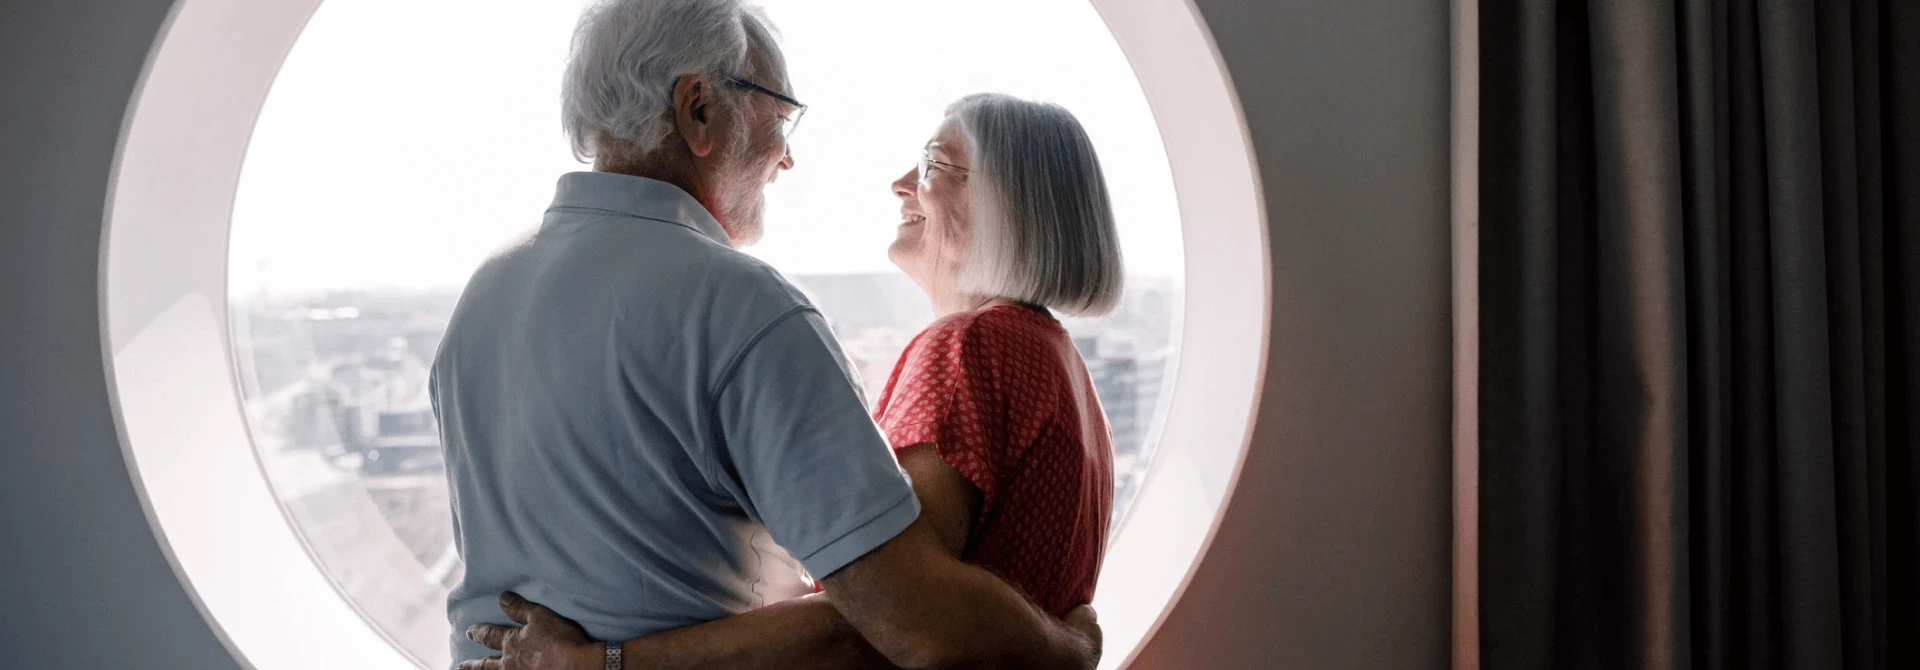 An elderly couple stand in front of a circular window, smiling at each other.